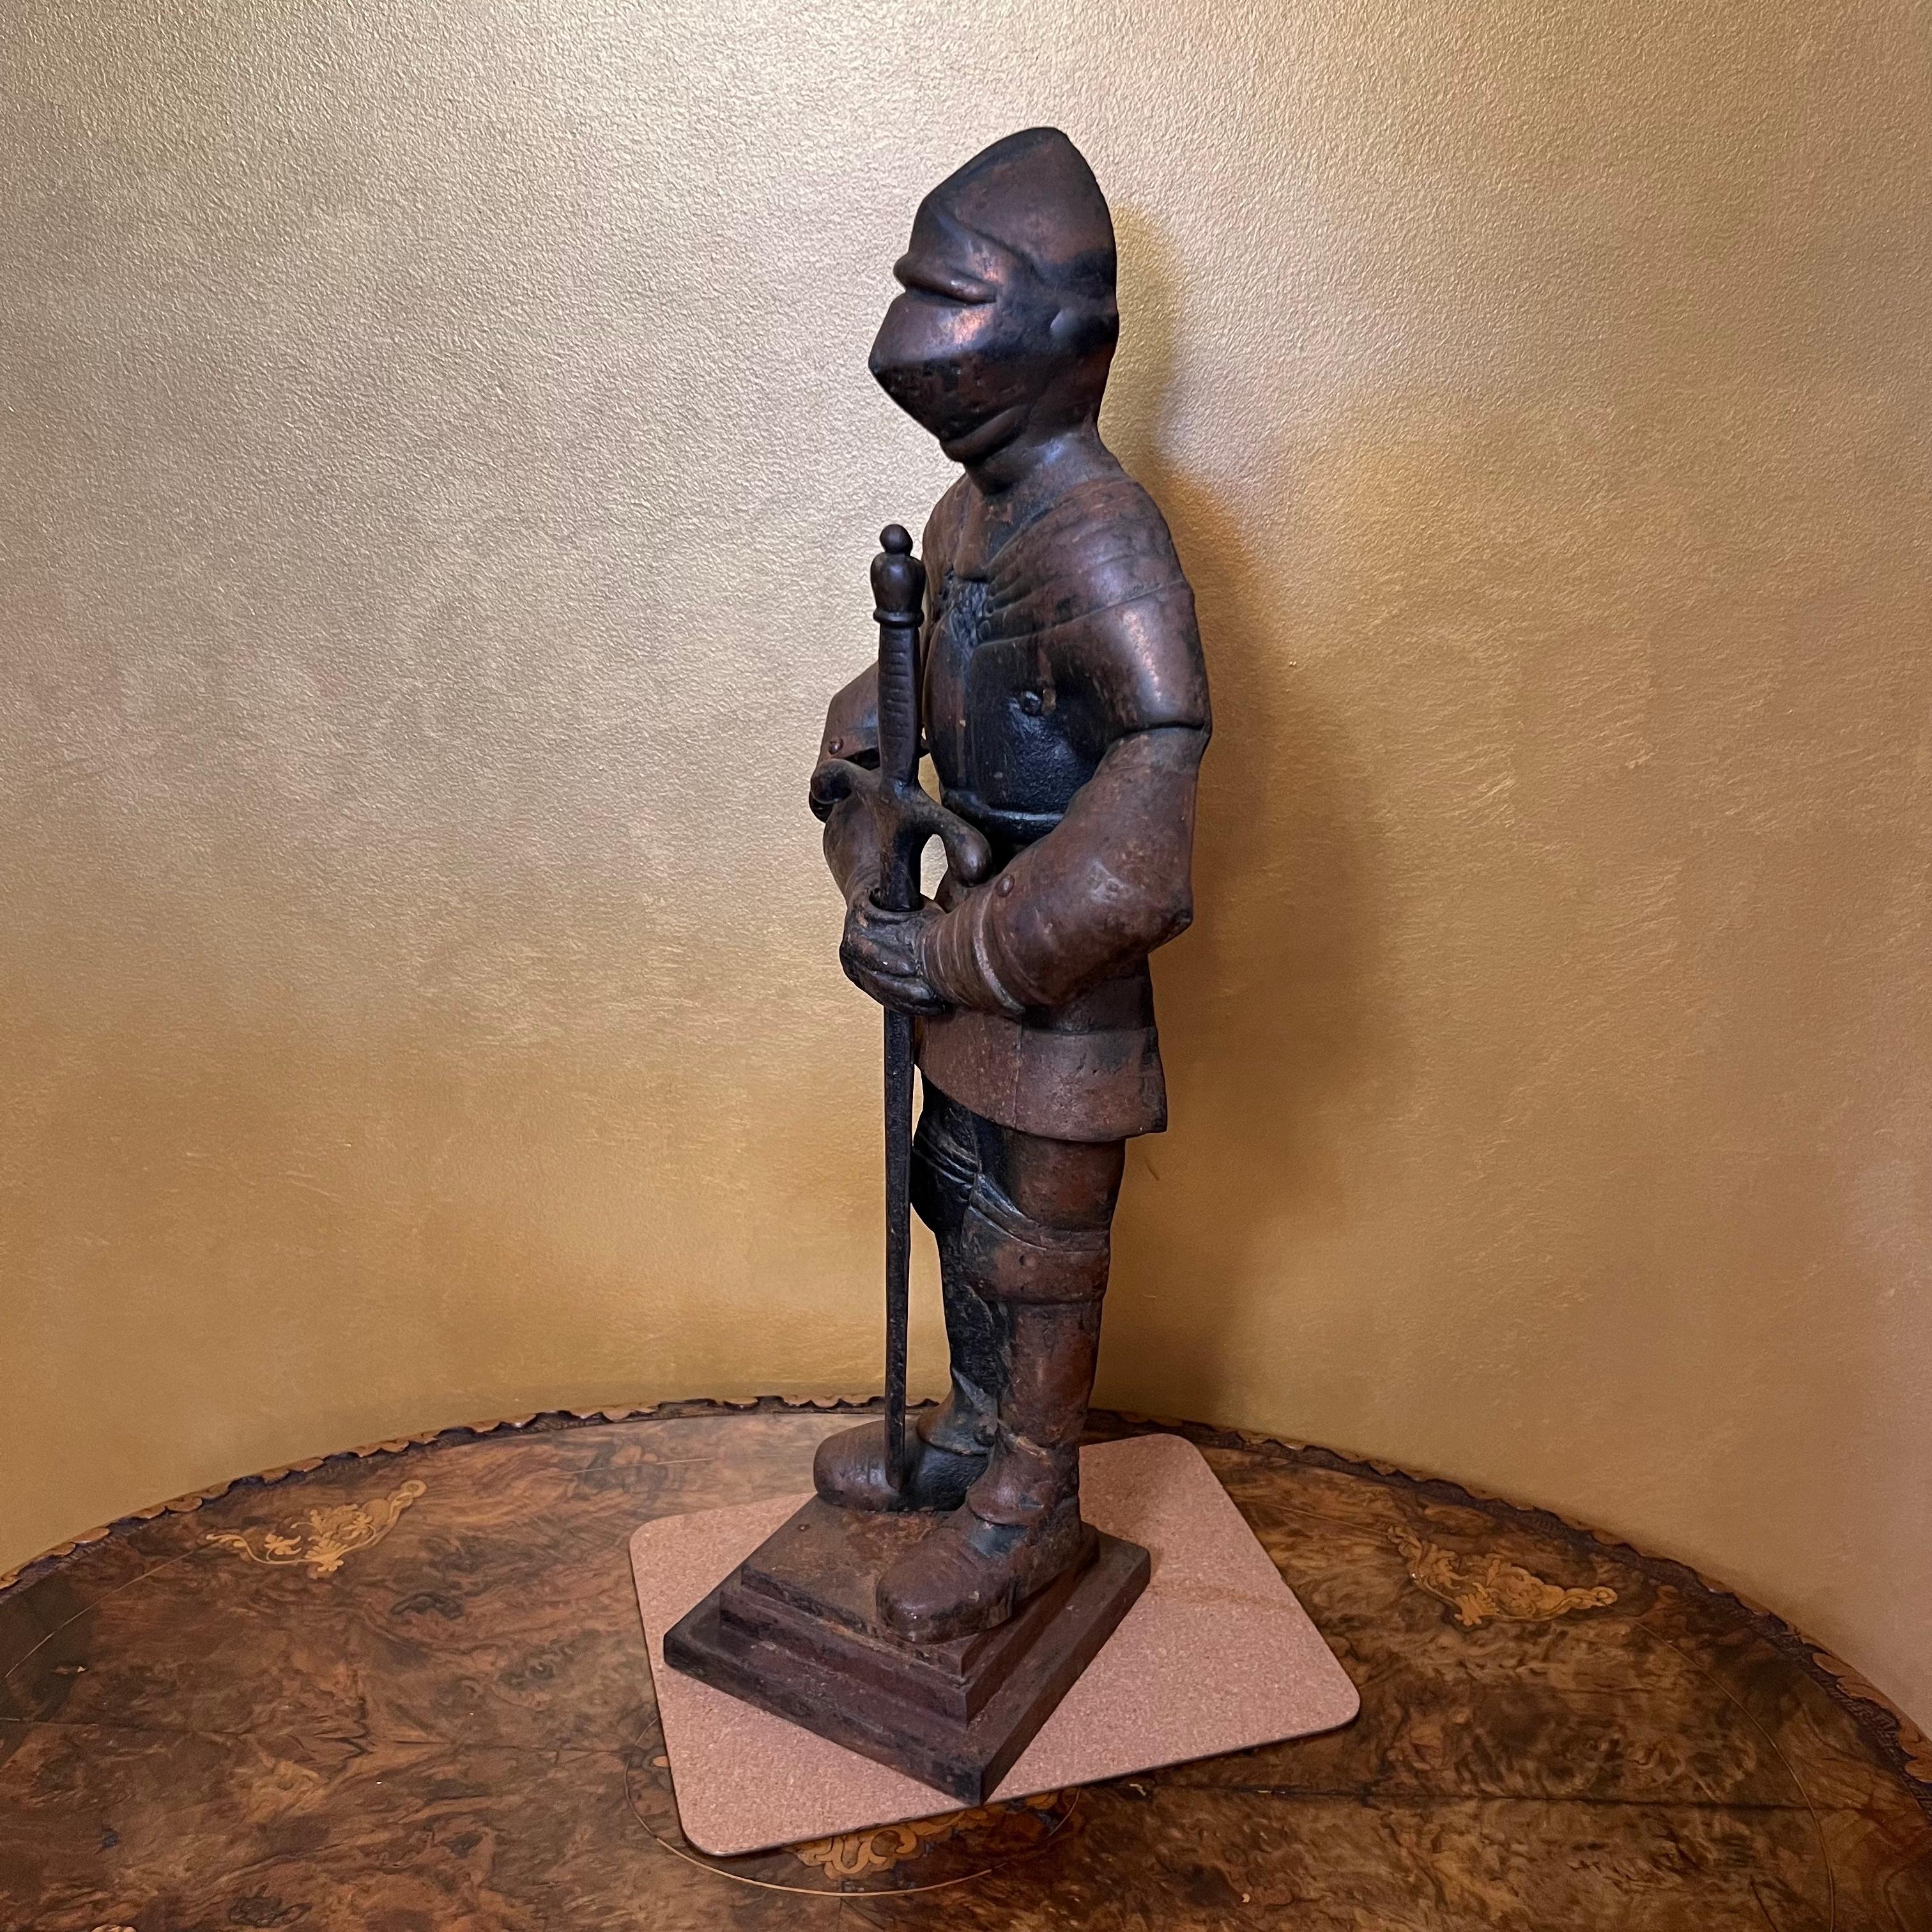 Half of a body on a stand, sword comes out, cast has rust ware it can be sandblasted and re painting if wanted a newer look. 

Material: Cast Iron 

Measurements: 61cm high, 12cm length, 12cm width

Antiques Yeah offers delivery to your door only